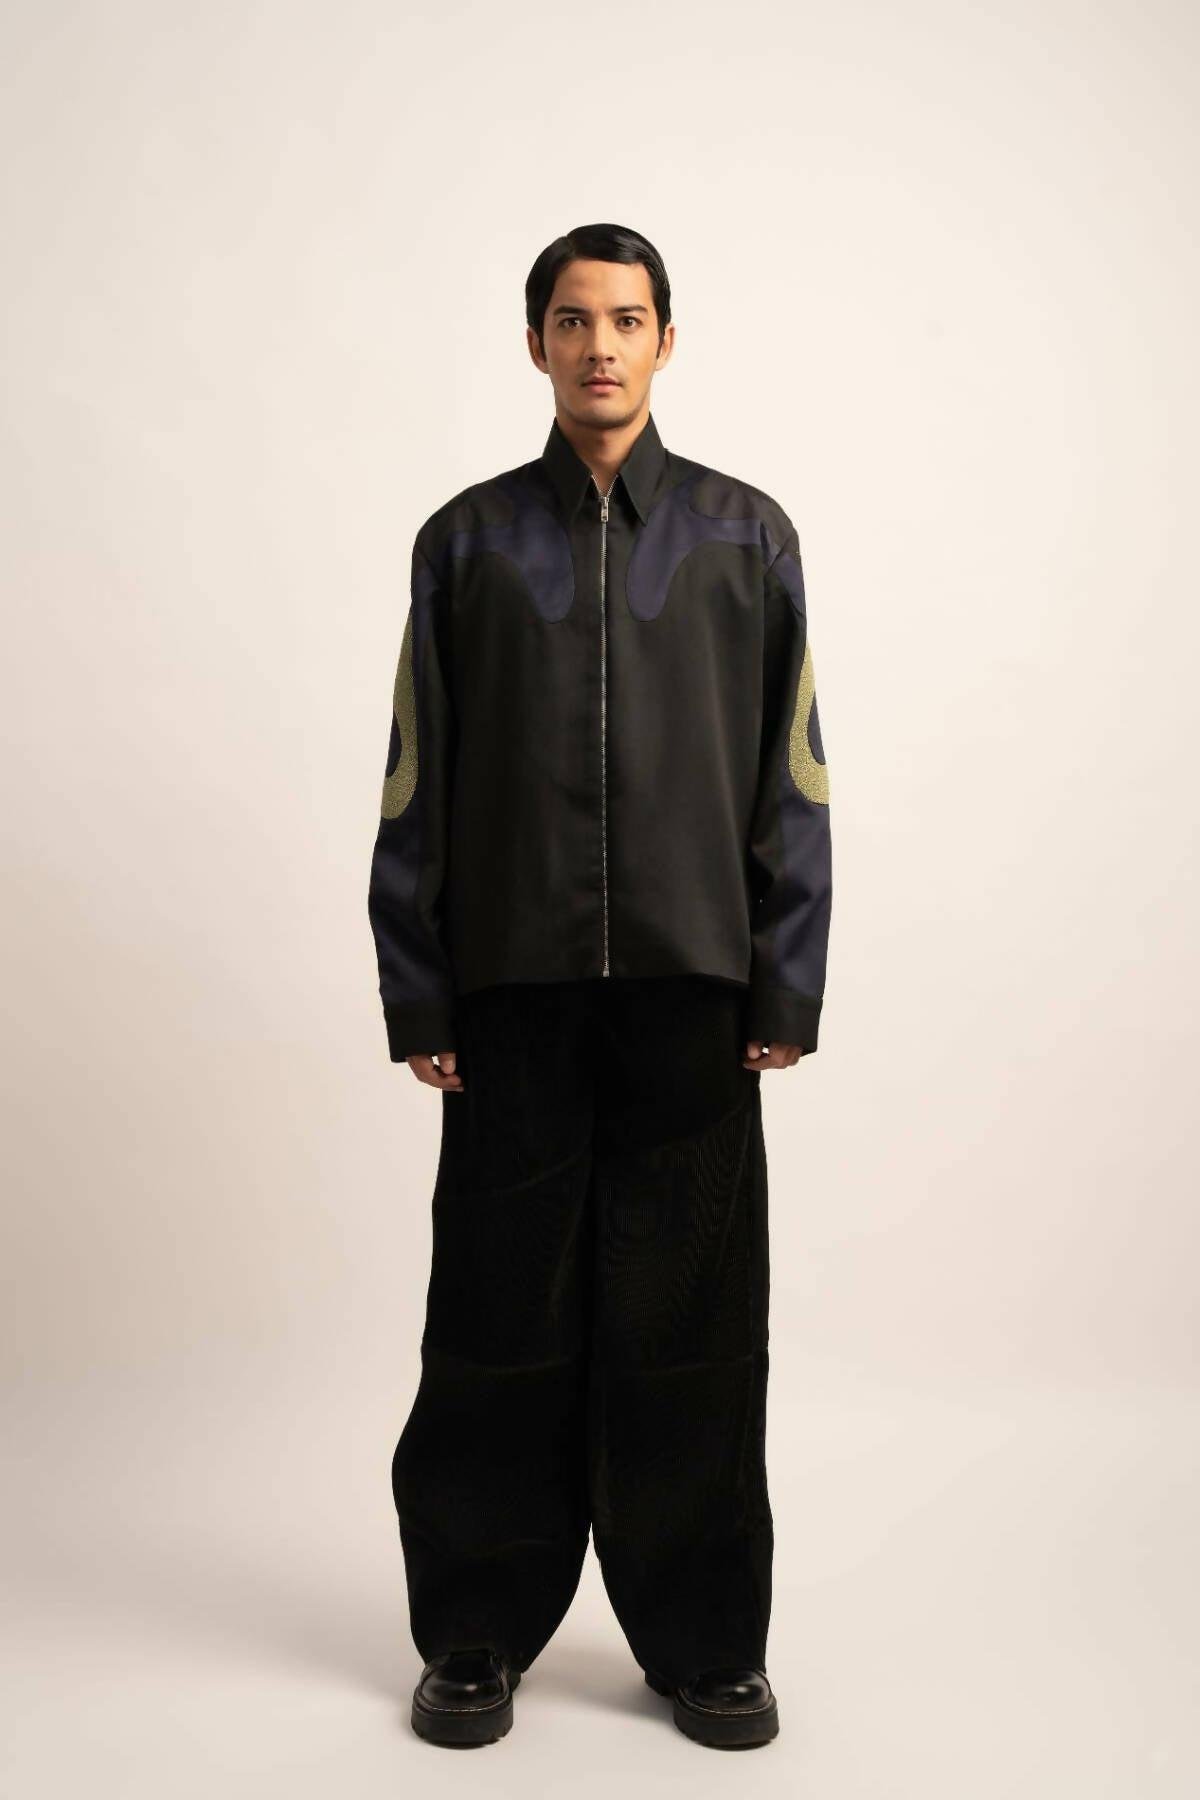 Flux Spectrum Jacket by SIDDHANT AGRAWAL LABEL